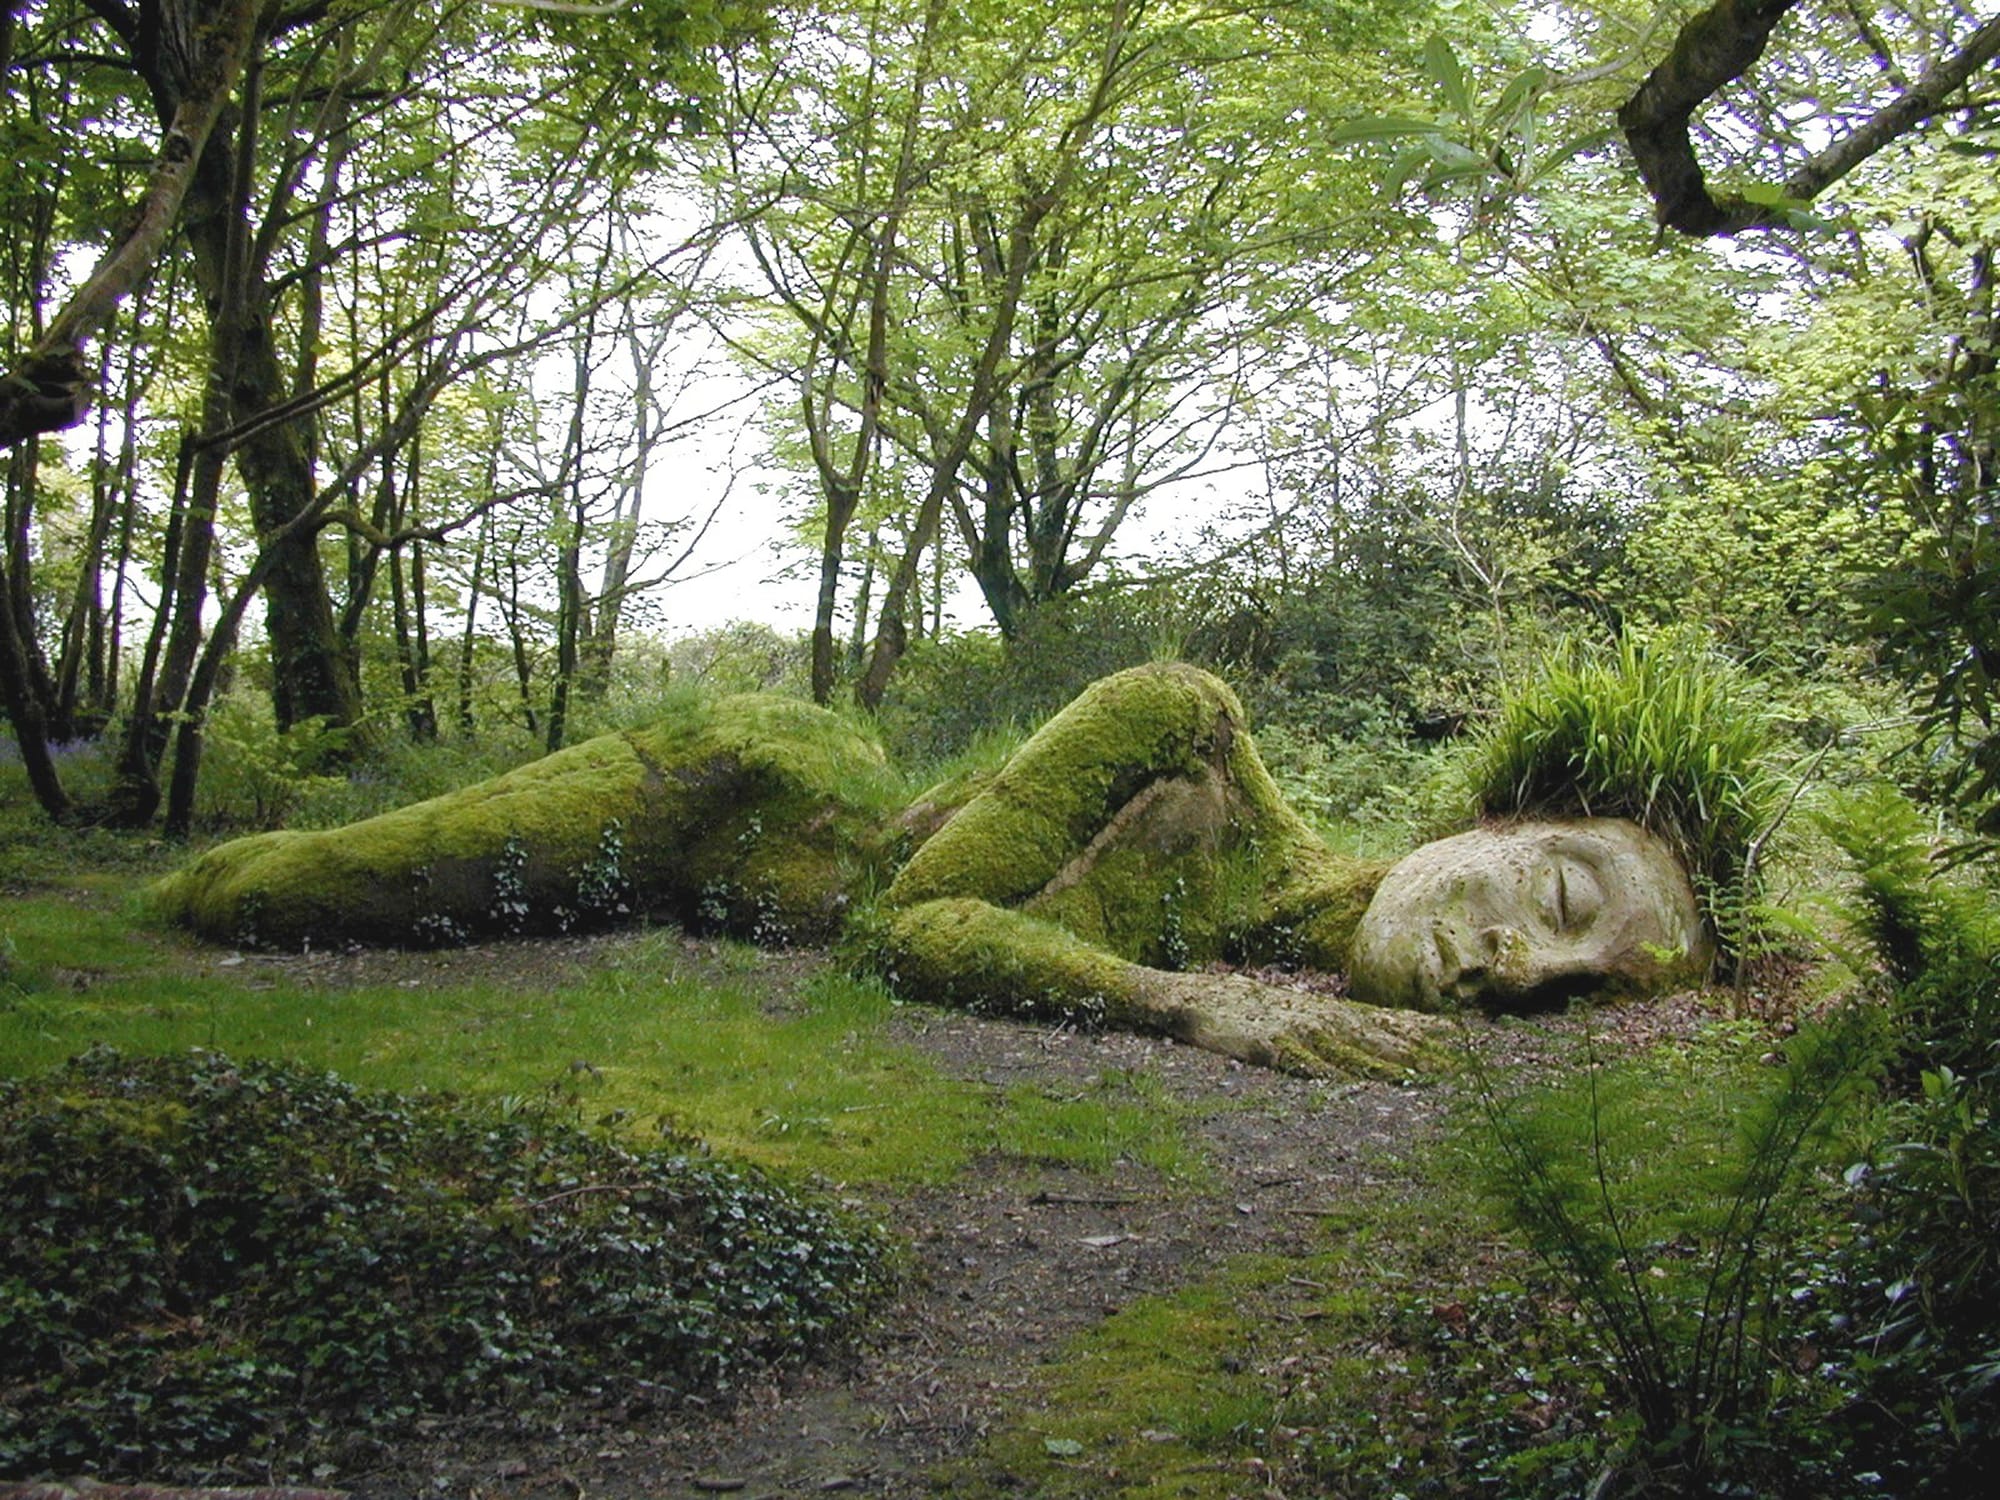 Sculpture of a stone person covered in moss in a woods.